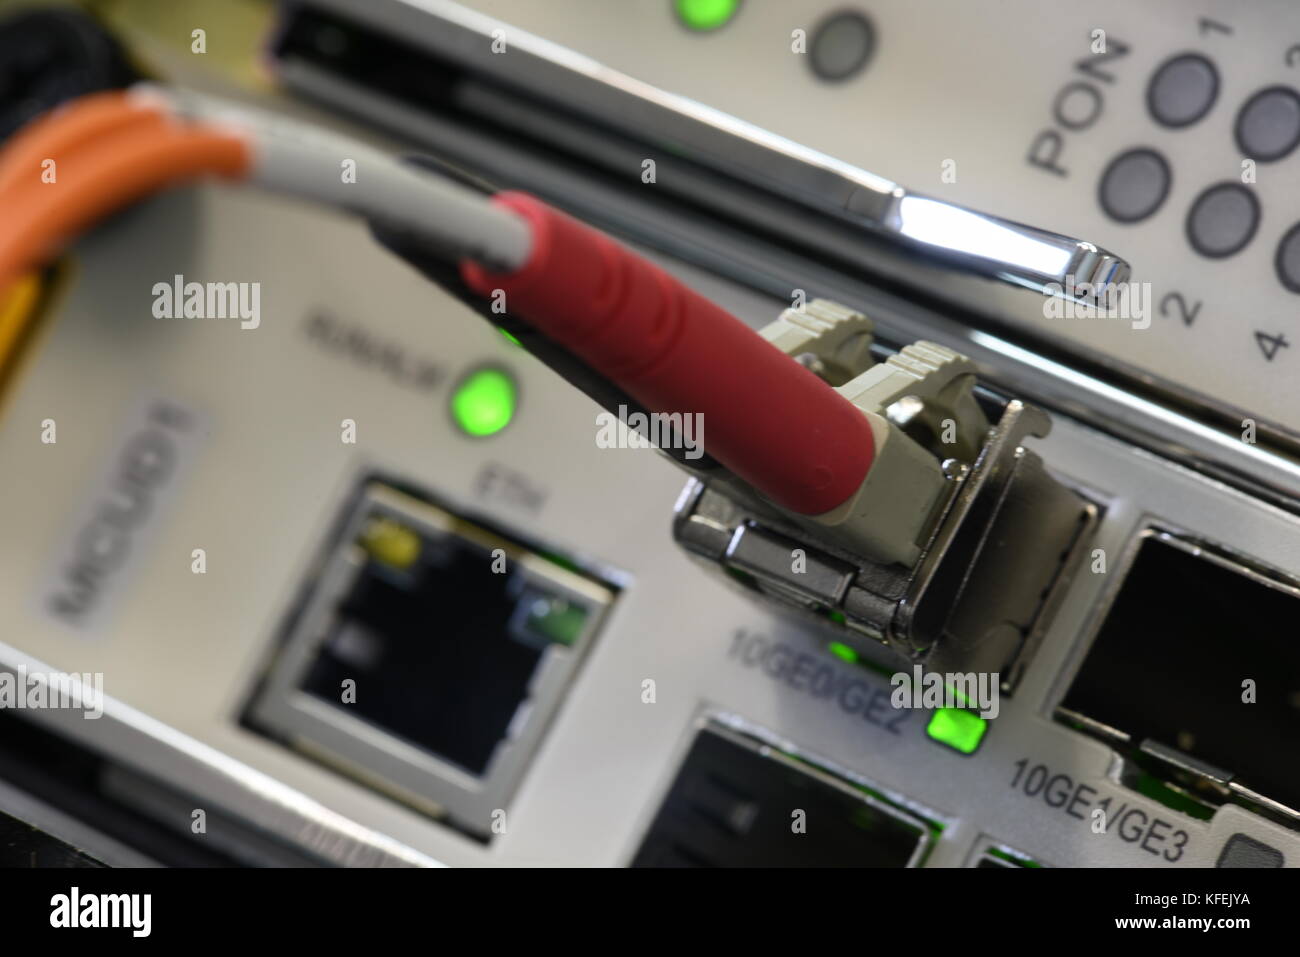 Optical Fibre Patch Cords Connected to Passive Line Unit, Information Technology in Internet of Things Devices Stock Photo